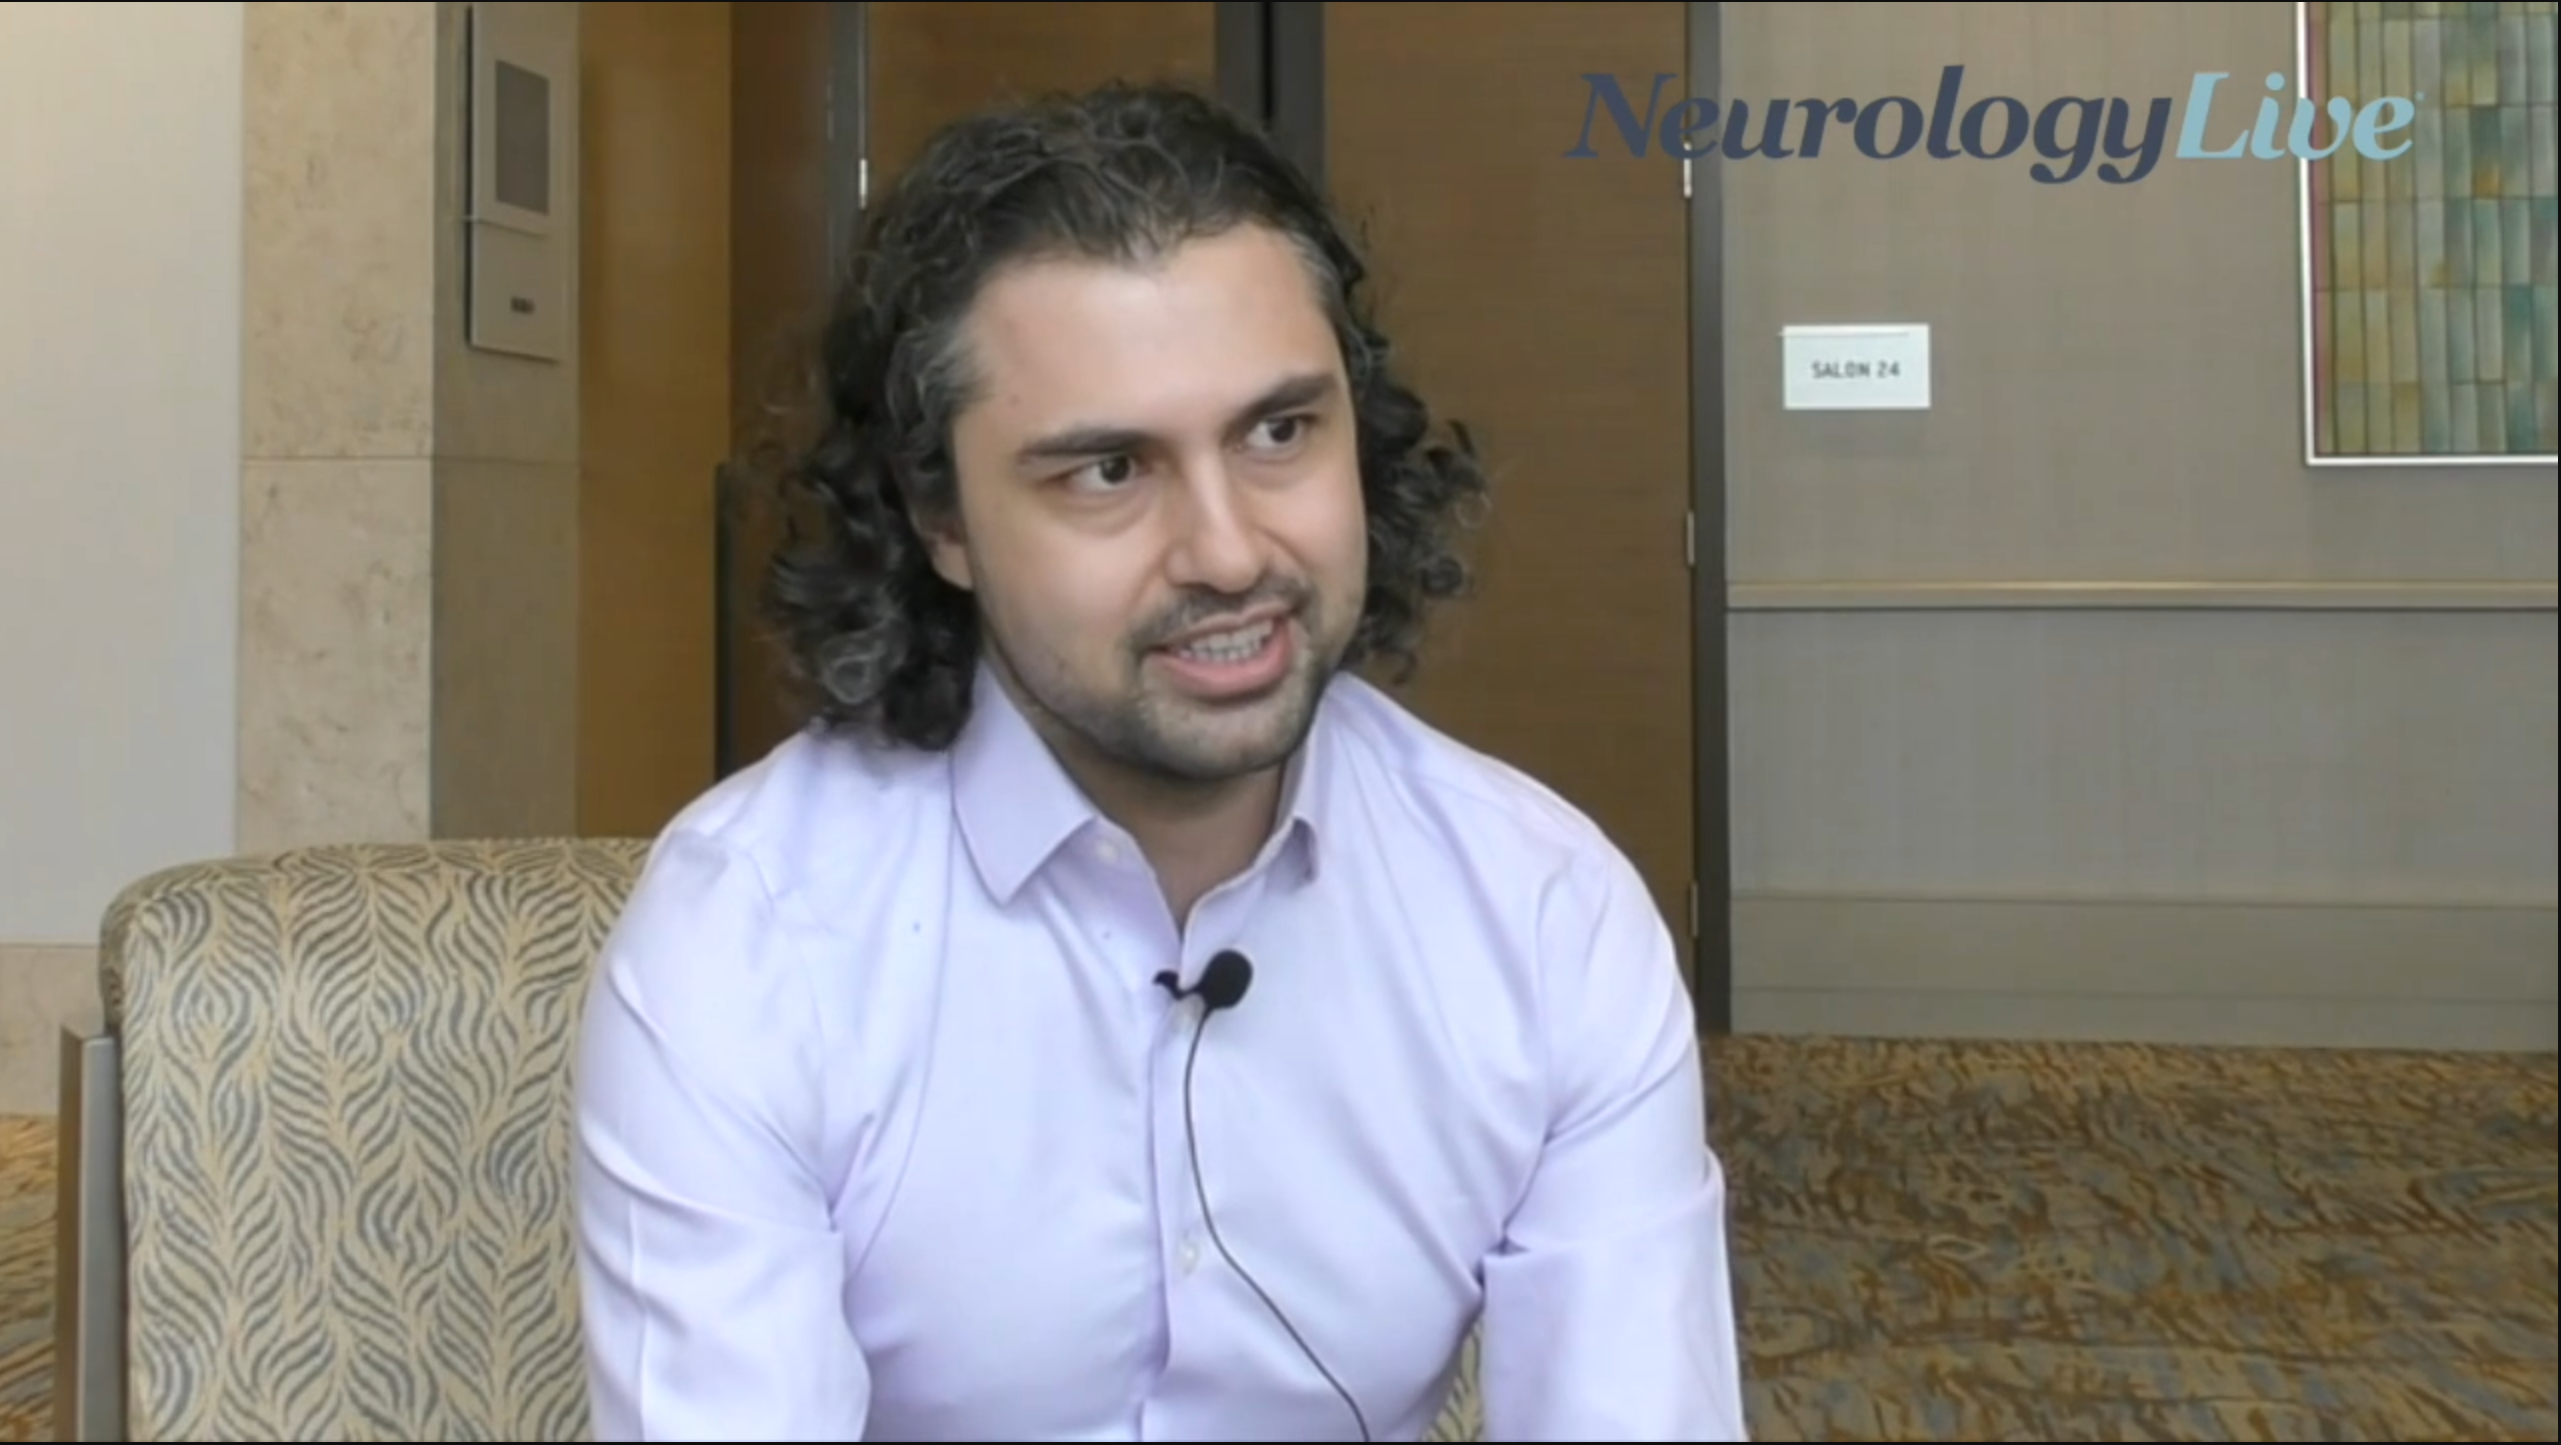 Promising Findings on the Role of T-bet+ Memory B Cells in MS: Rajiv Jain, PhD